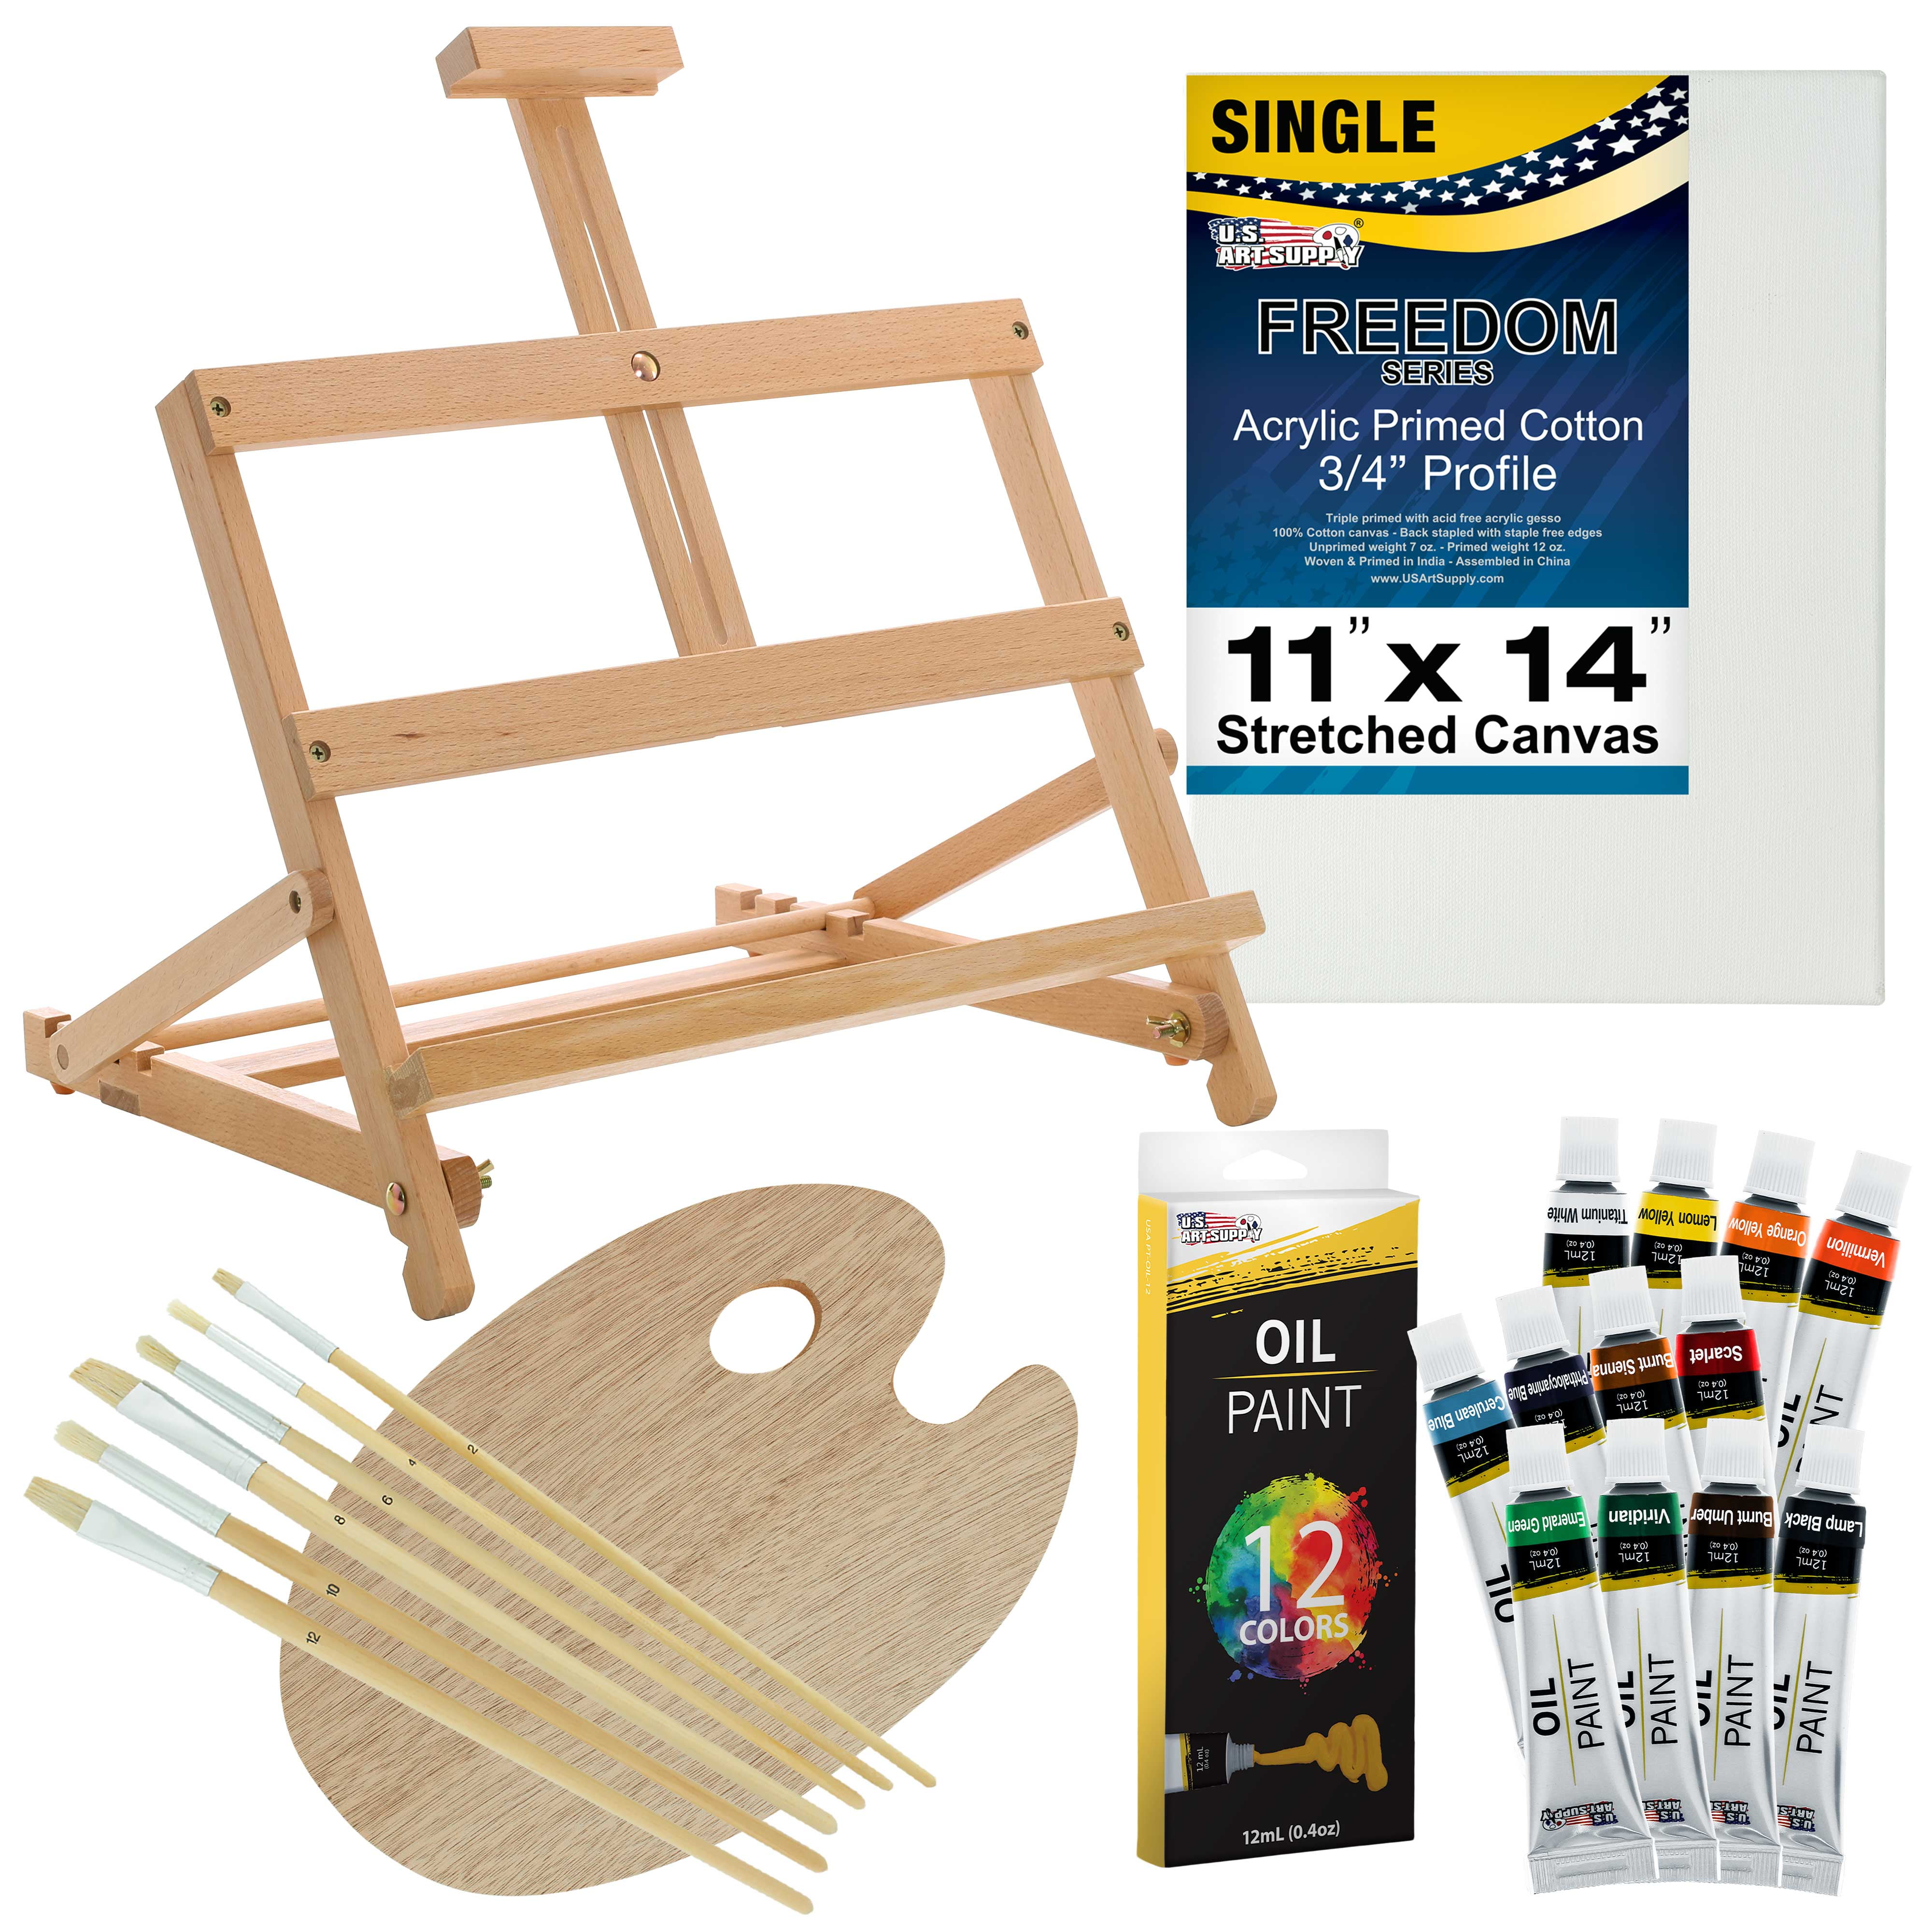 U.s. Art Supply 21-Piece Artist Oil Painting Set With Wooden H-Frame Studio Easel, 12 Vivid Oil Paint Colors, Stretched Canvas, 6 Brushes, Wood Painting Palette - Kids, Students, Adults, Starter Kit - Walmart.com